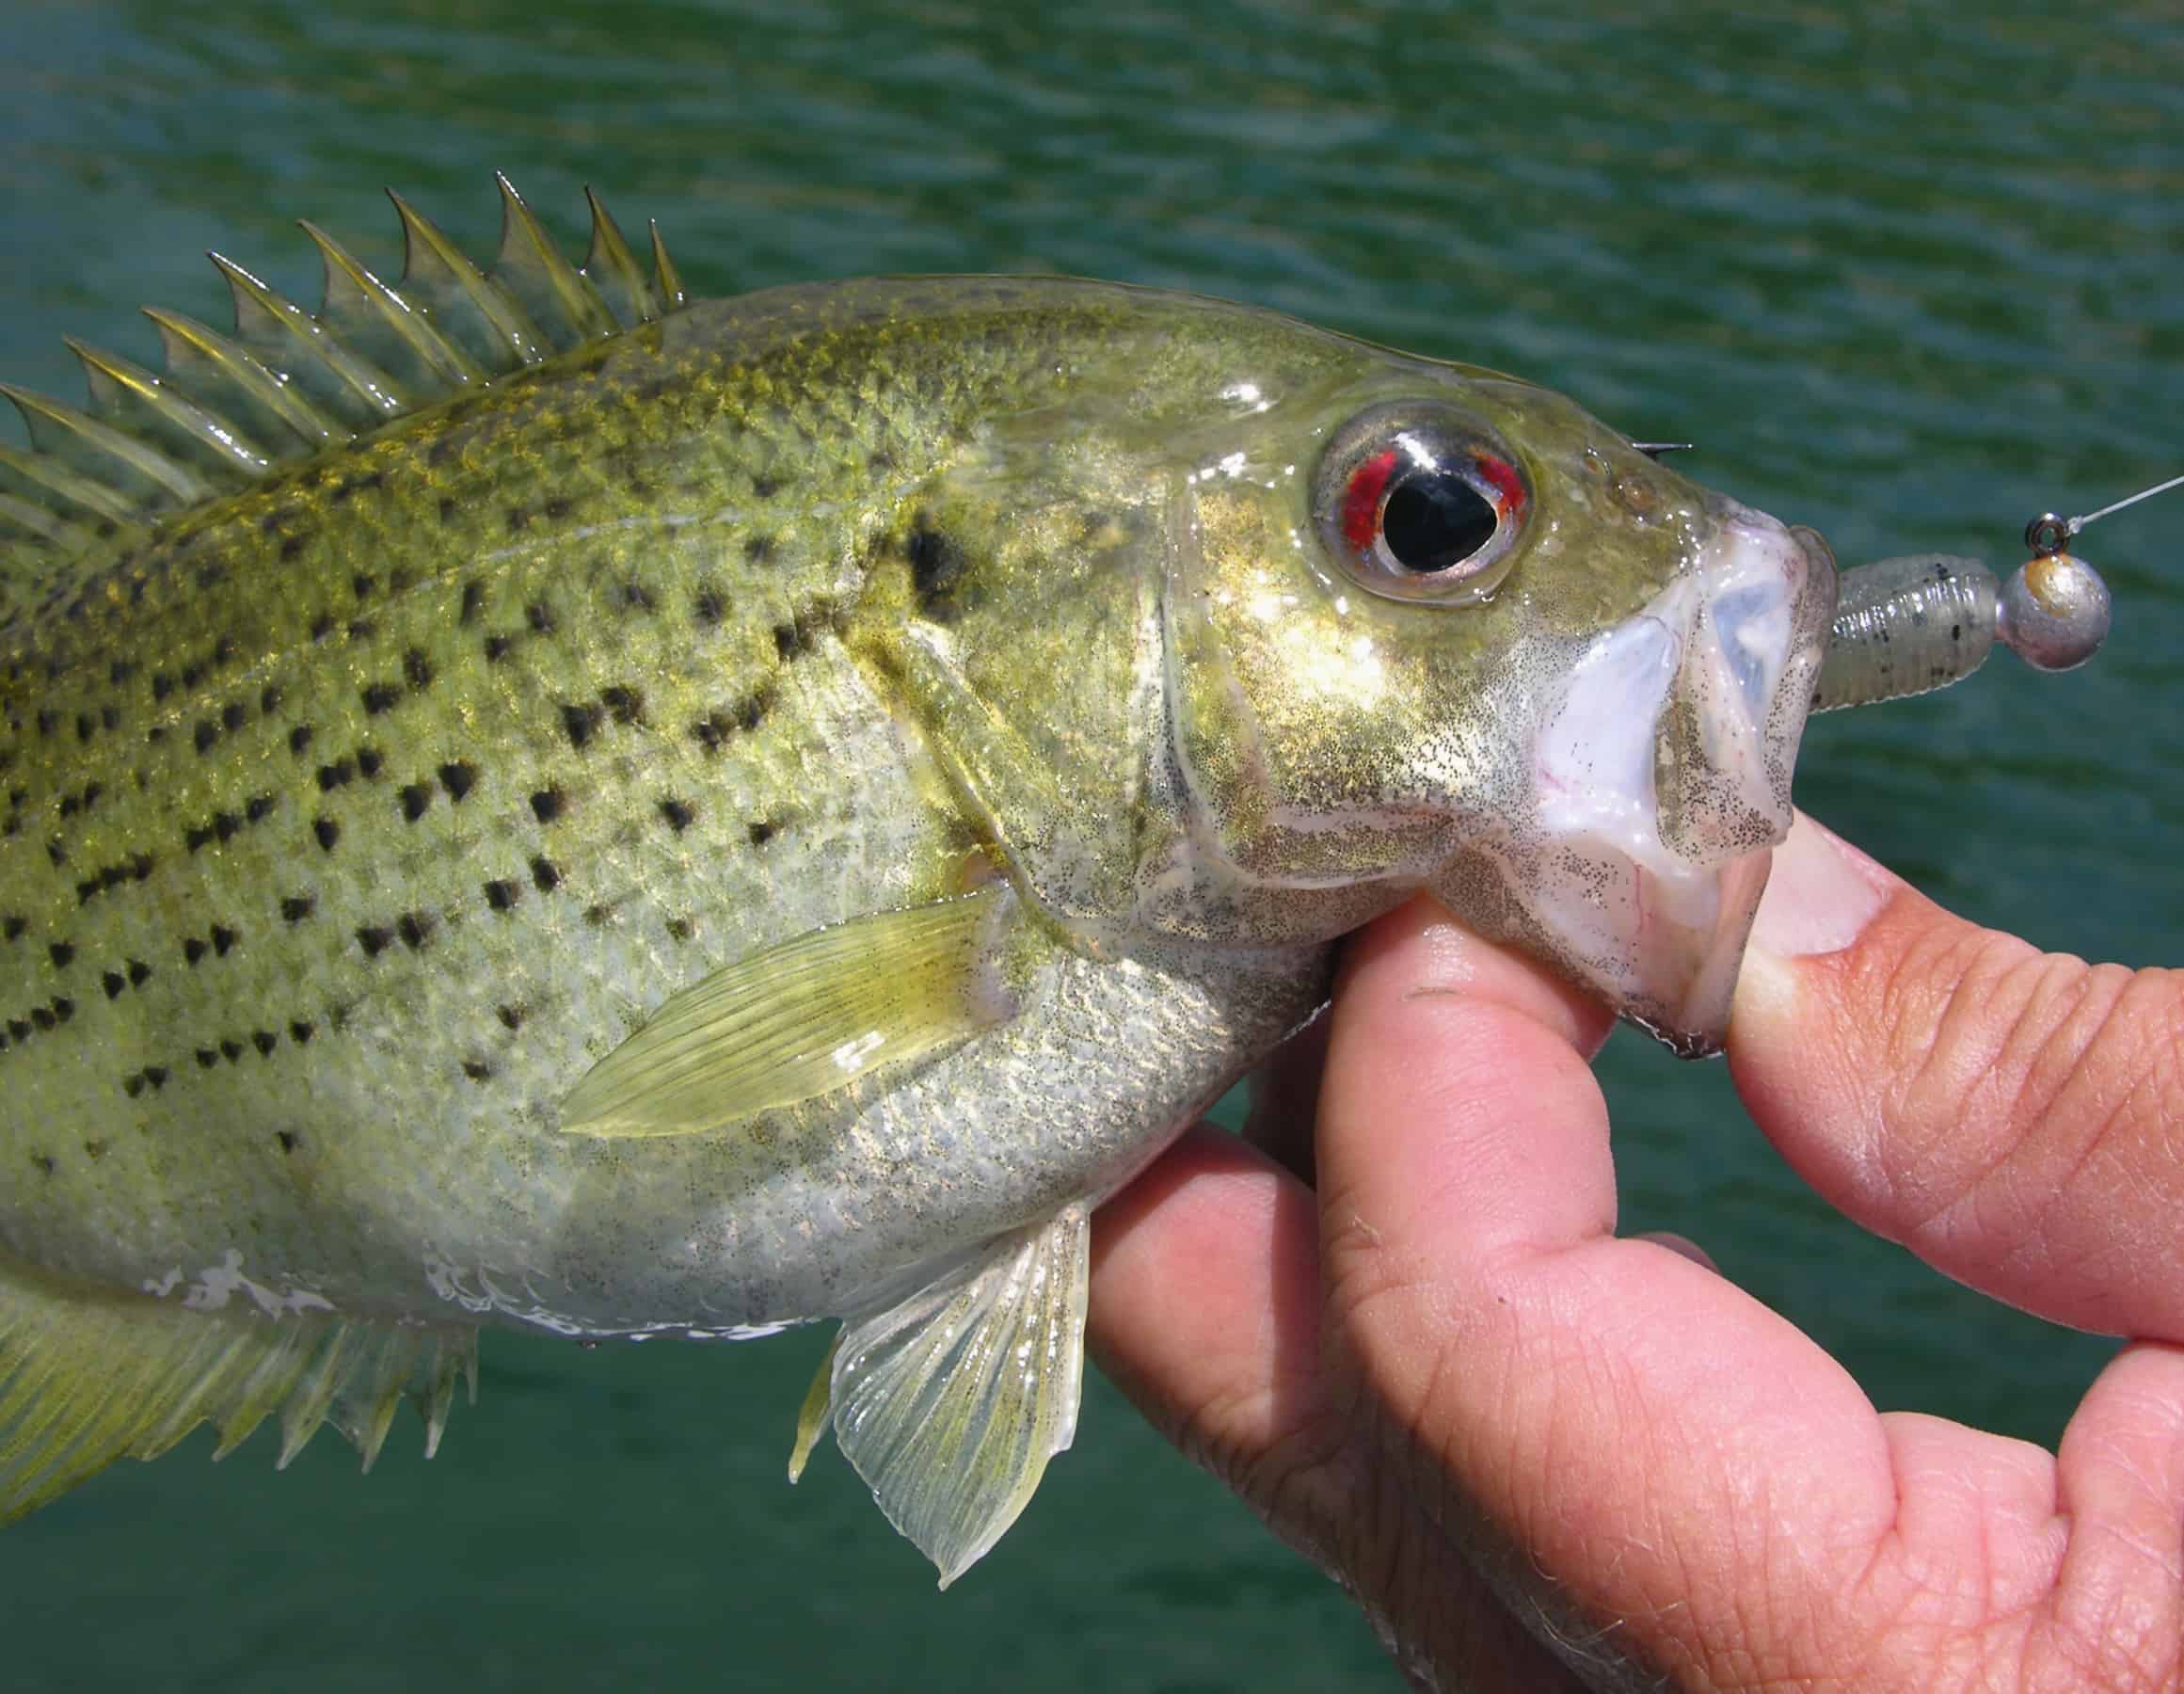 Rock bass caught by angler.